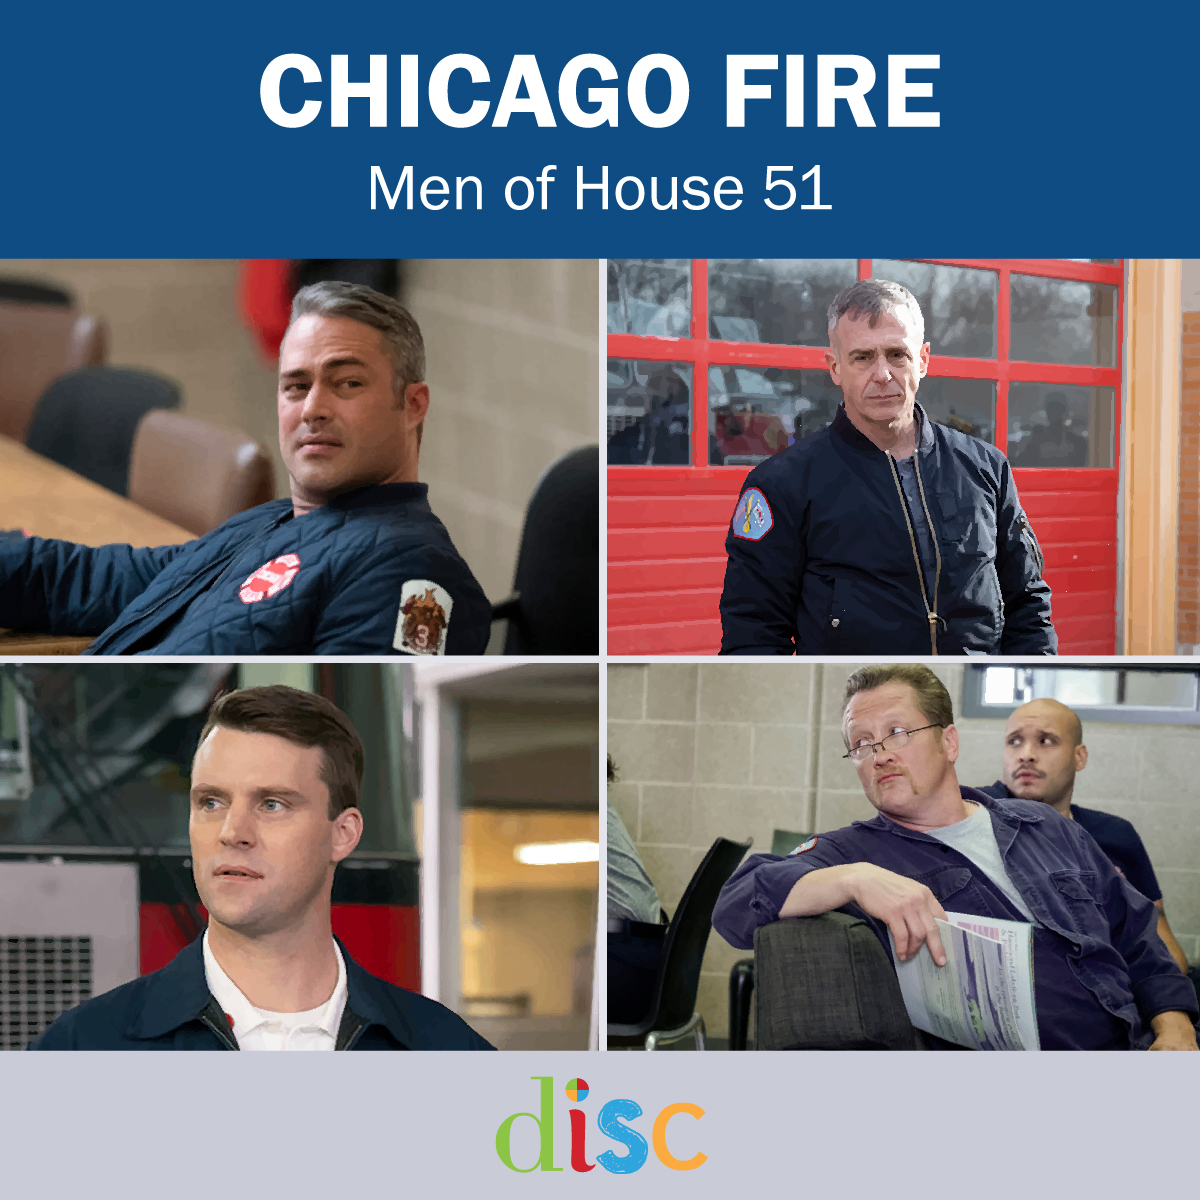 Chicago Fire The Men of House 51 DISC Personality Testing Blog